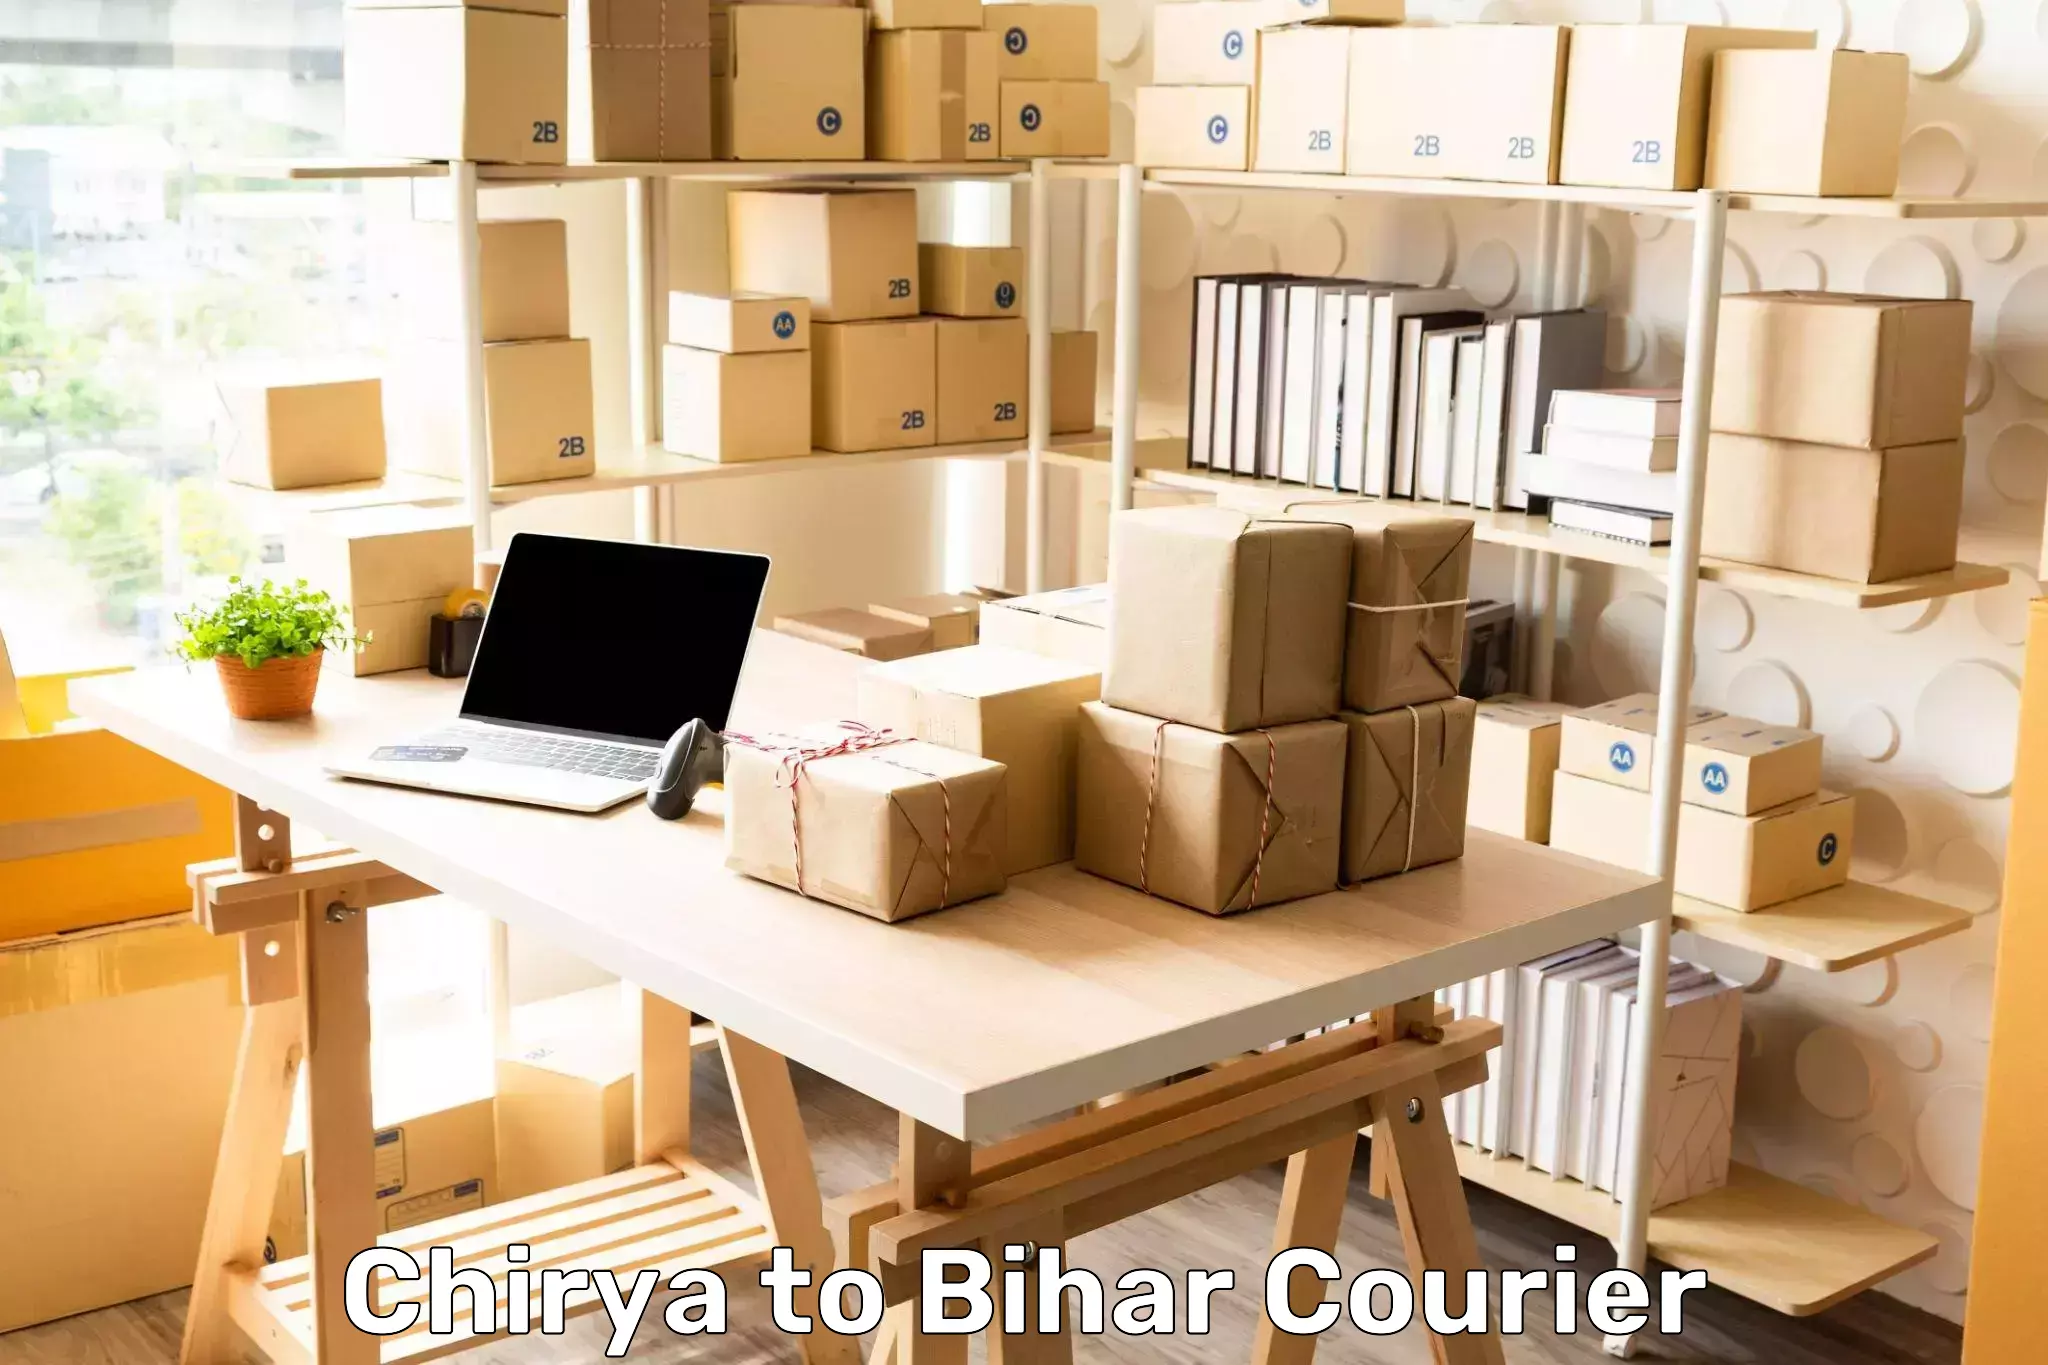 Parcel service for businesses in Chirya to Bihar